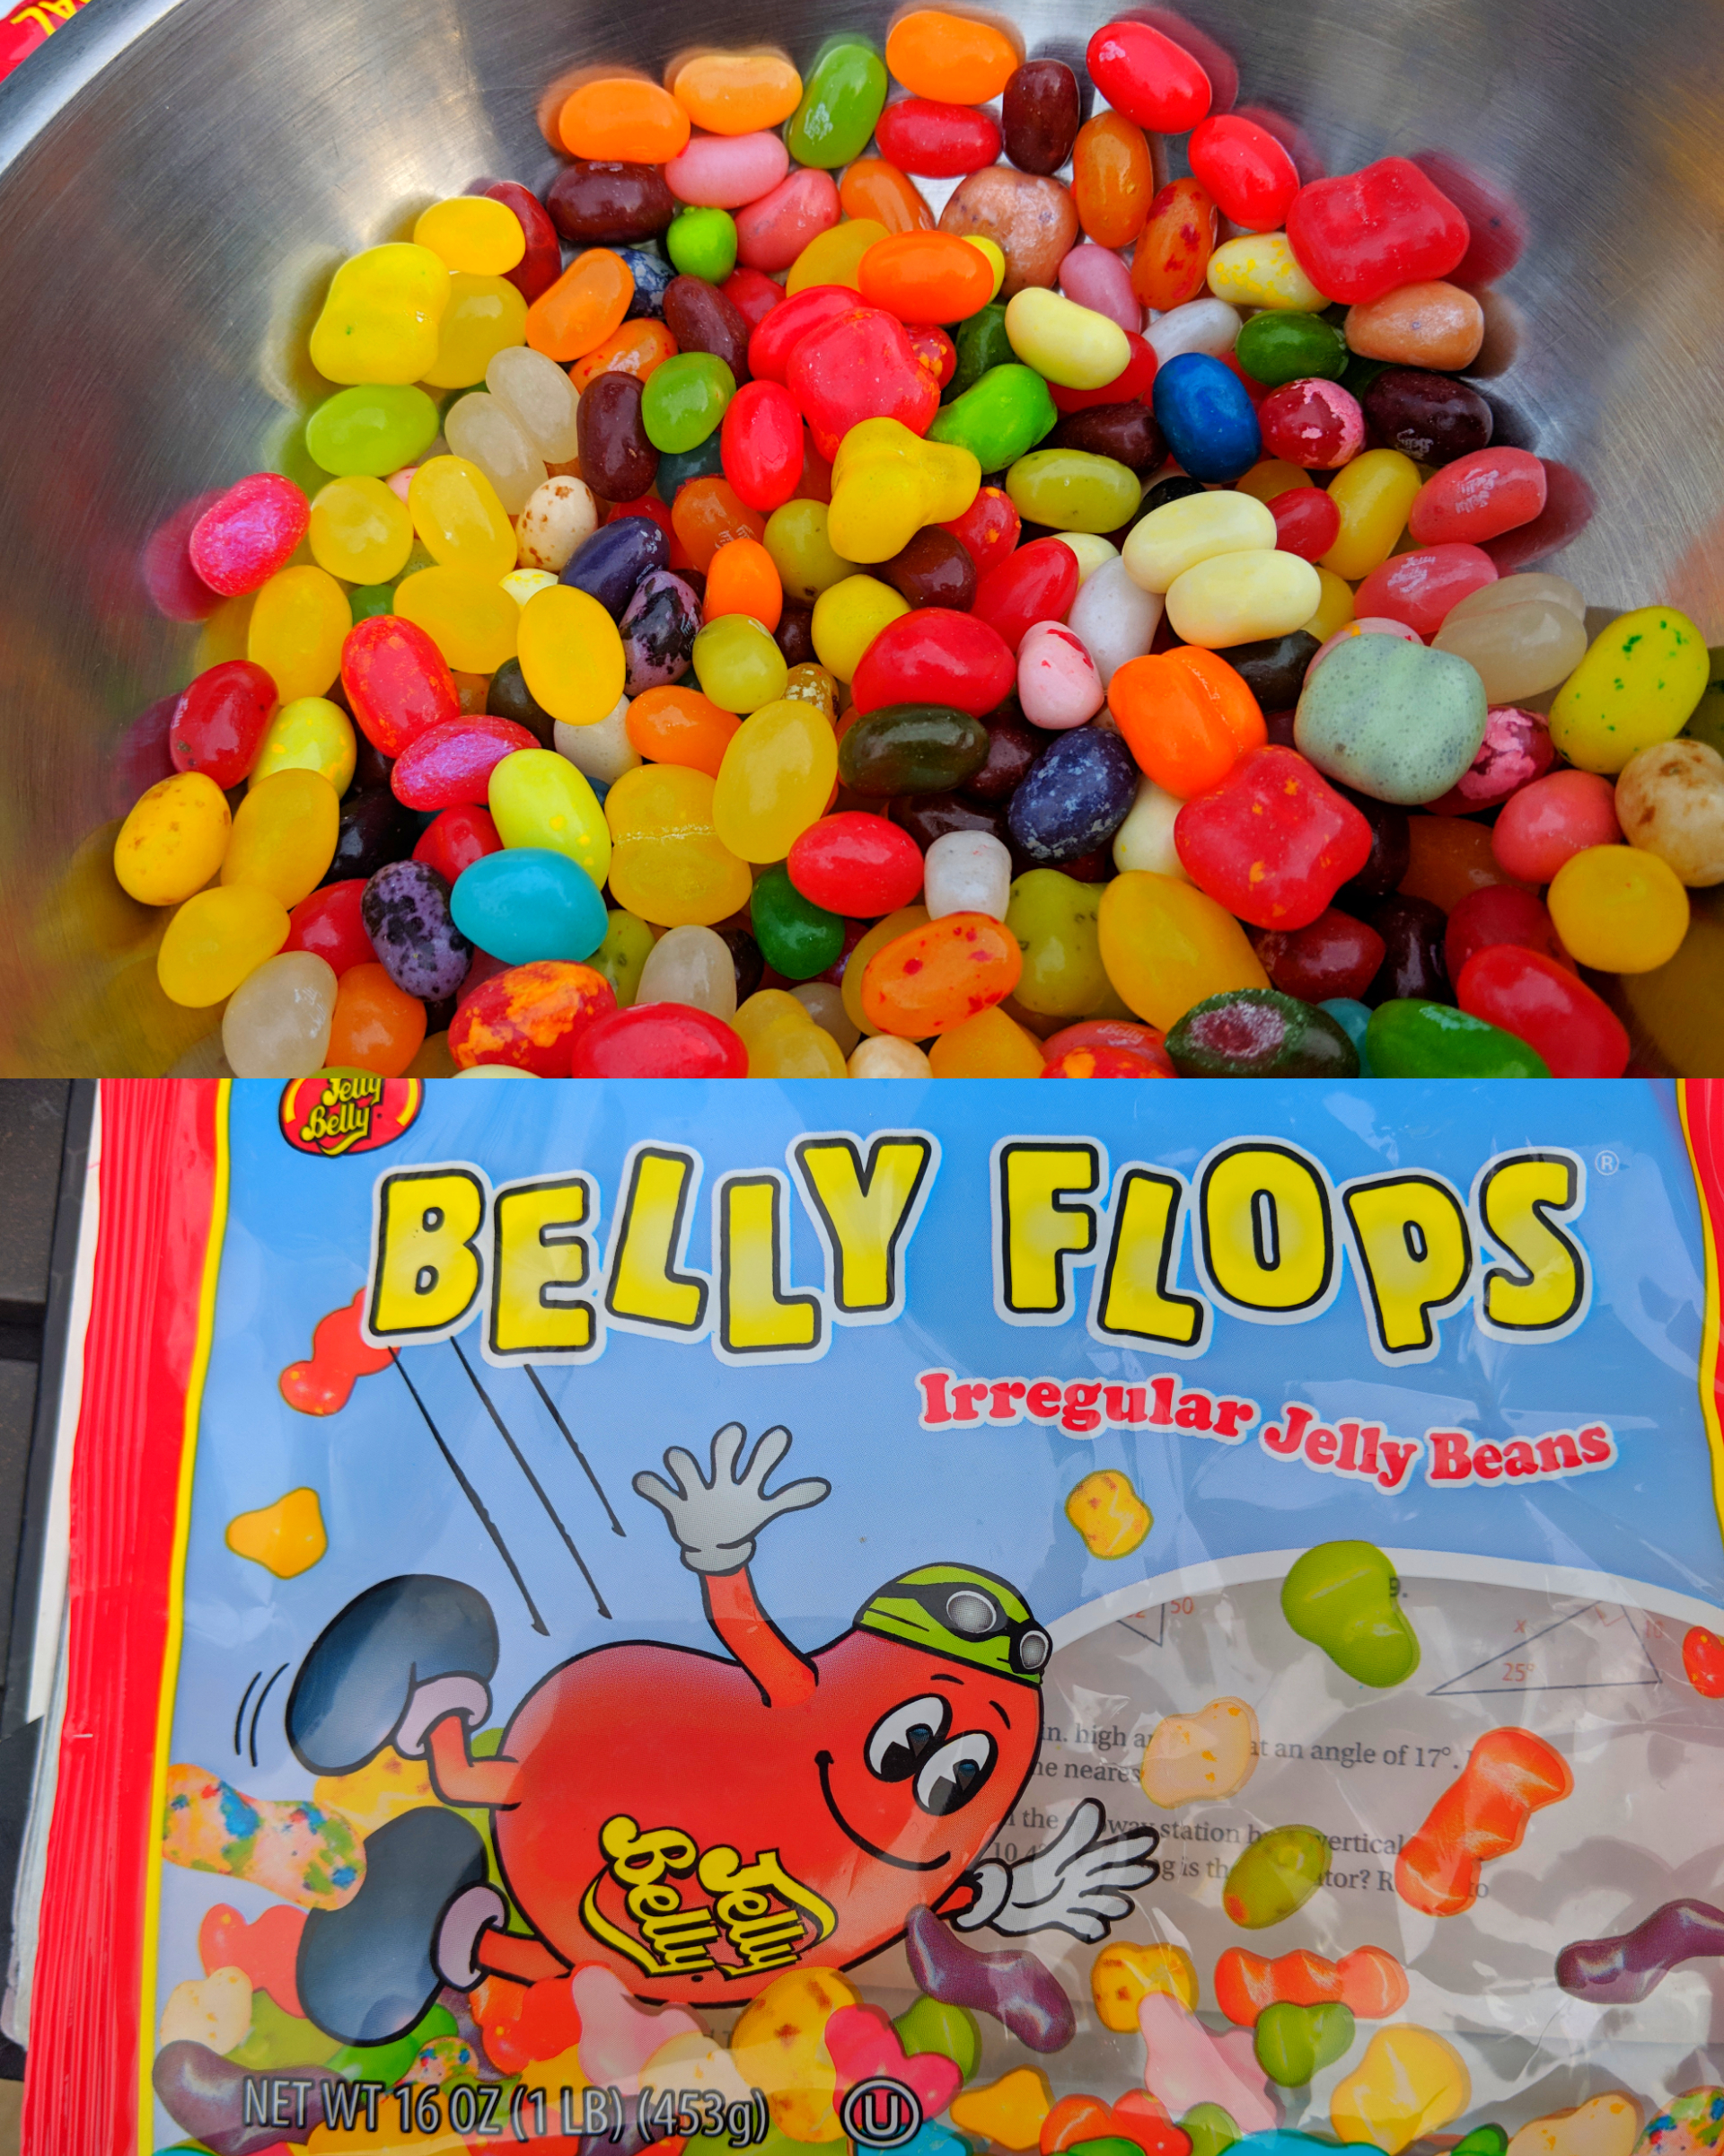 Jelly Belly sells factory rejects called Belly Flops